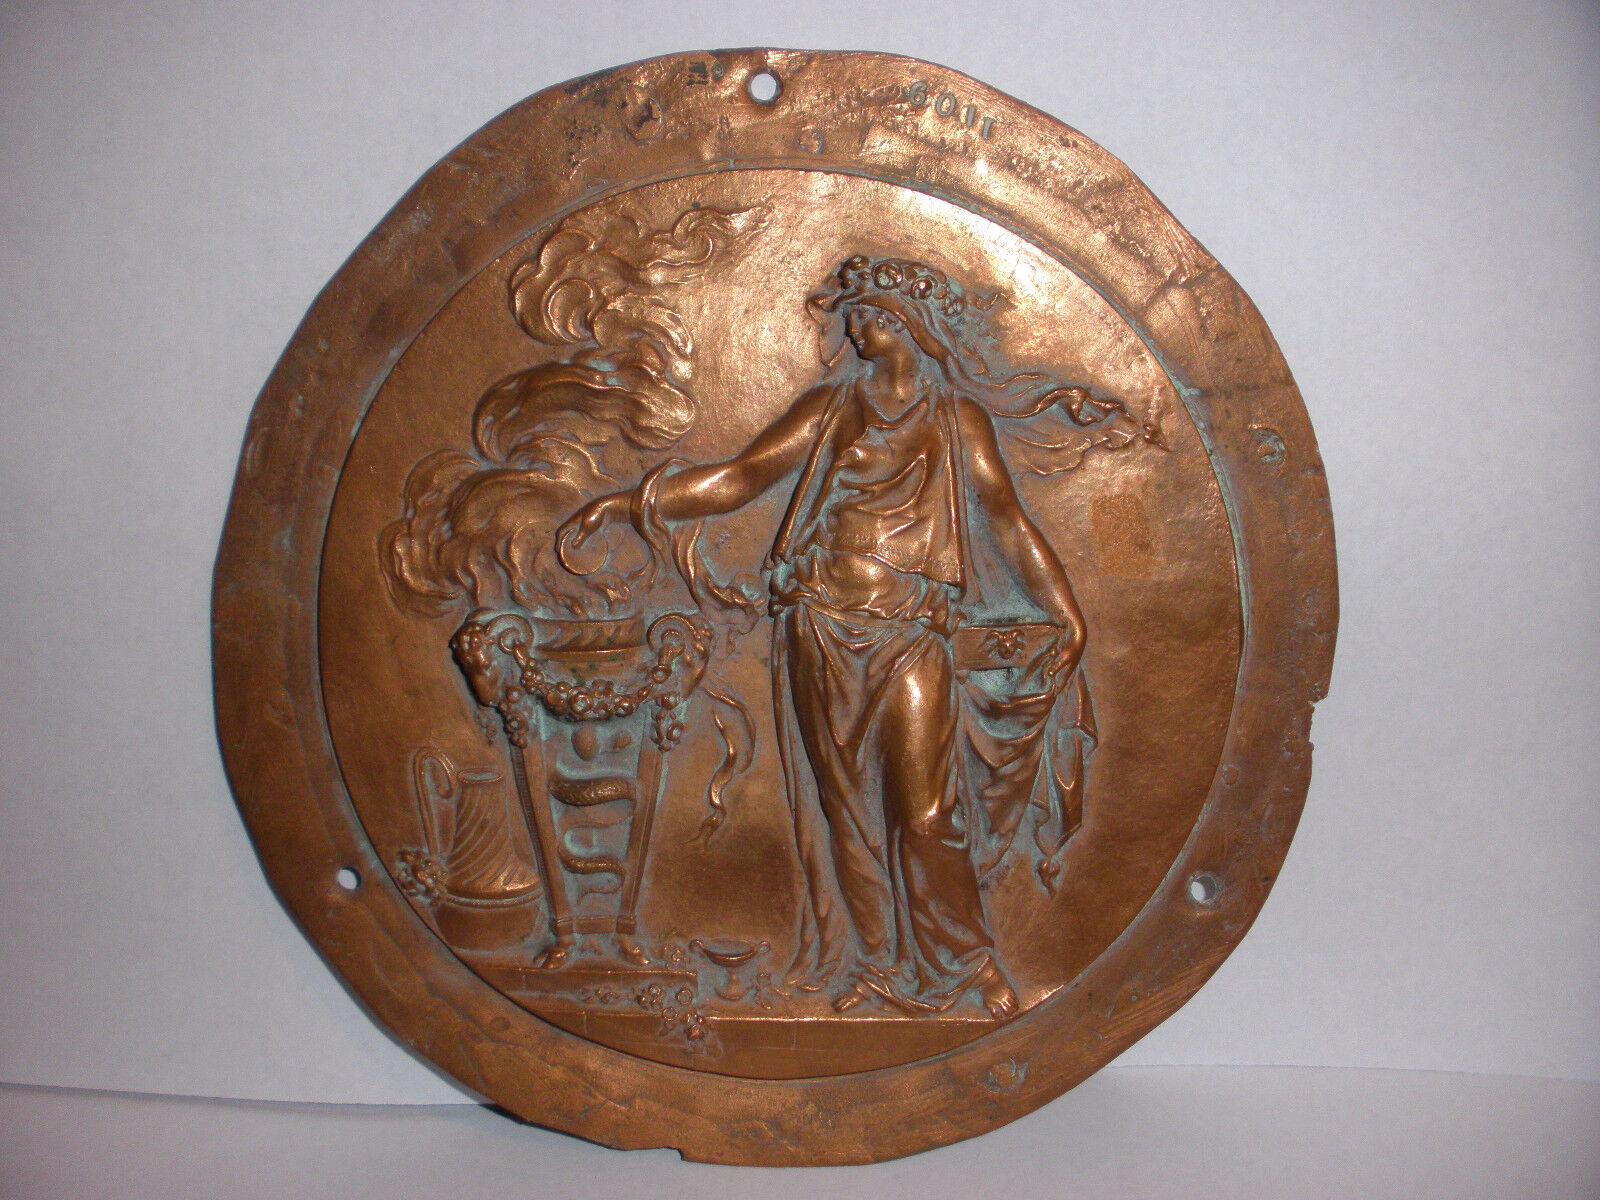 Great antique bronze oval neoclassical Roman or Greek muse high relief plaque 